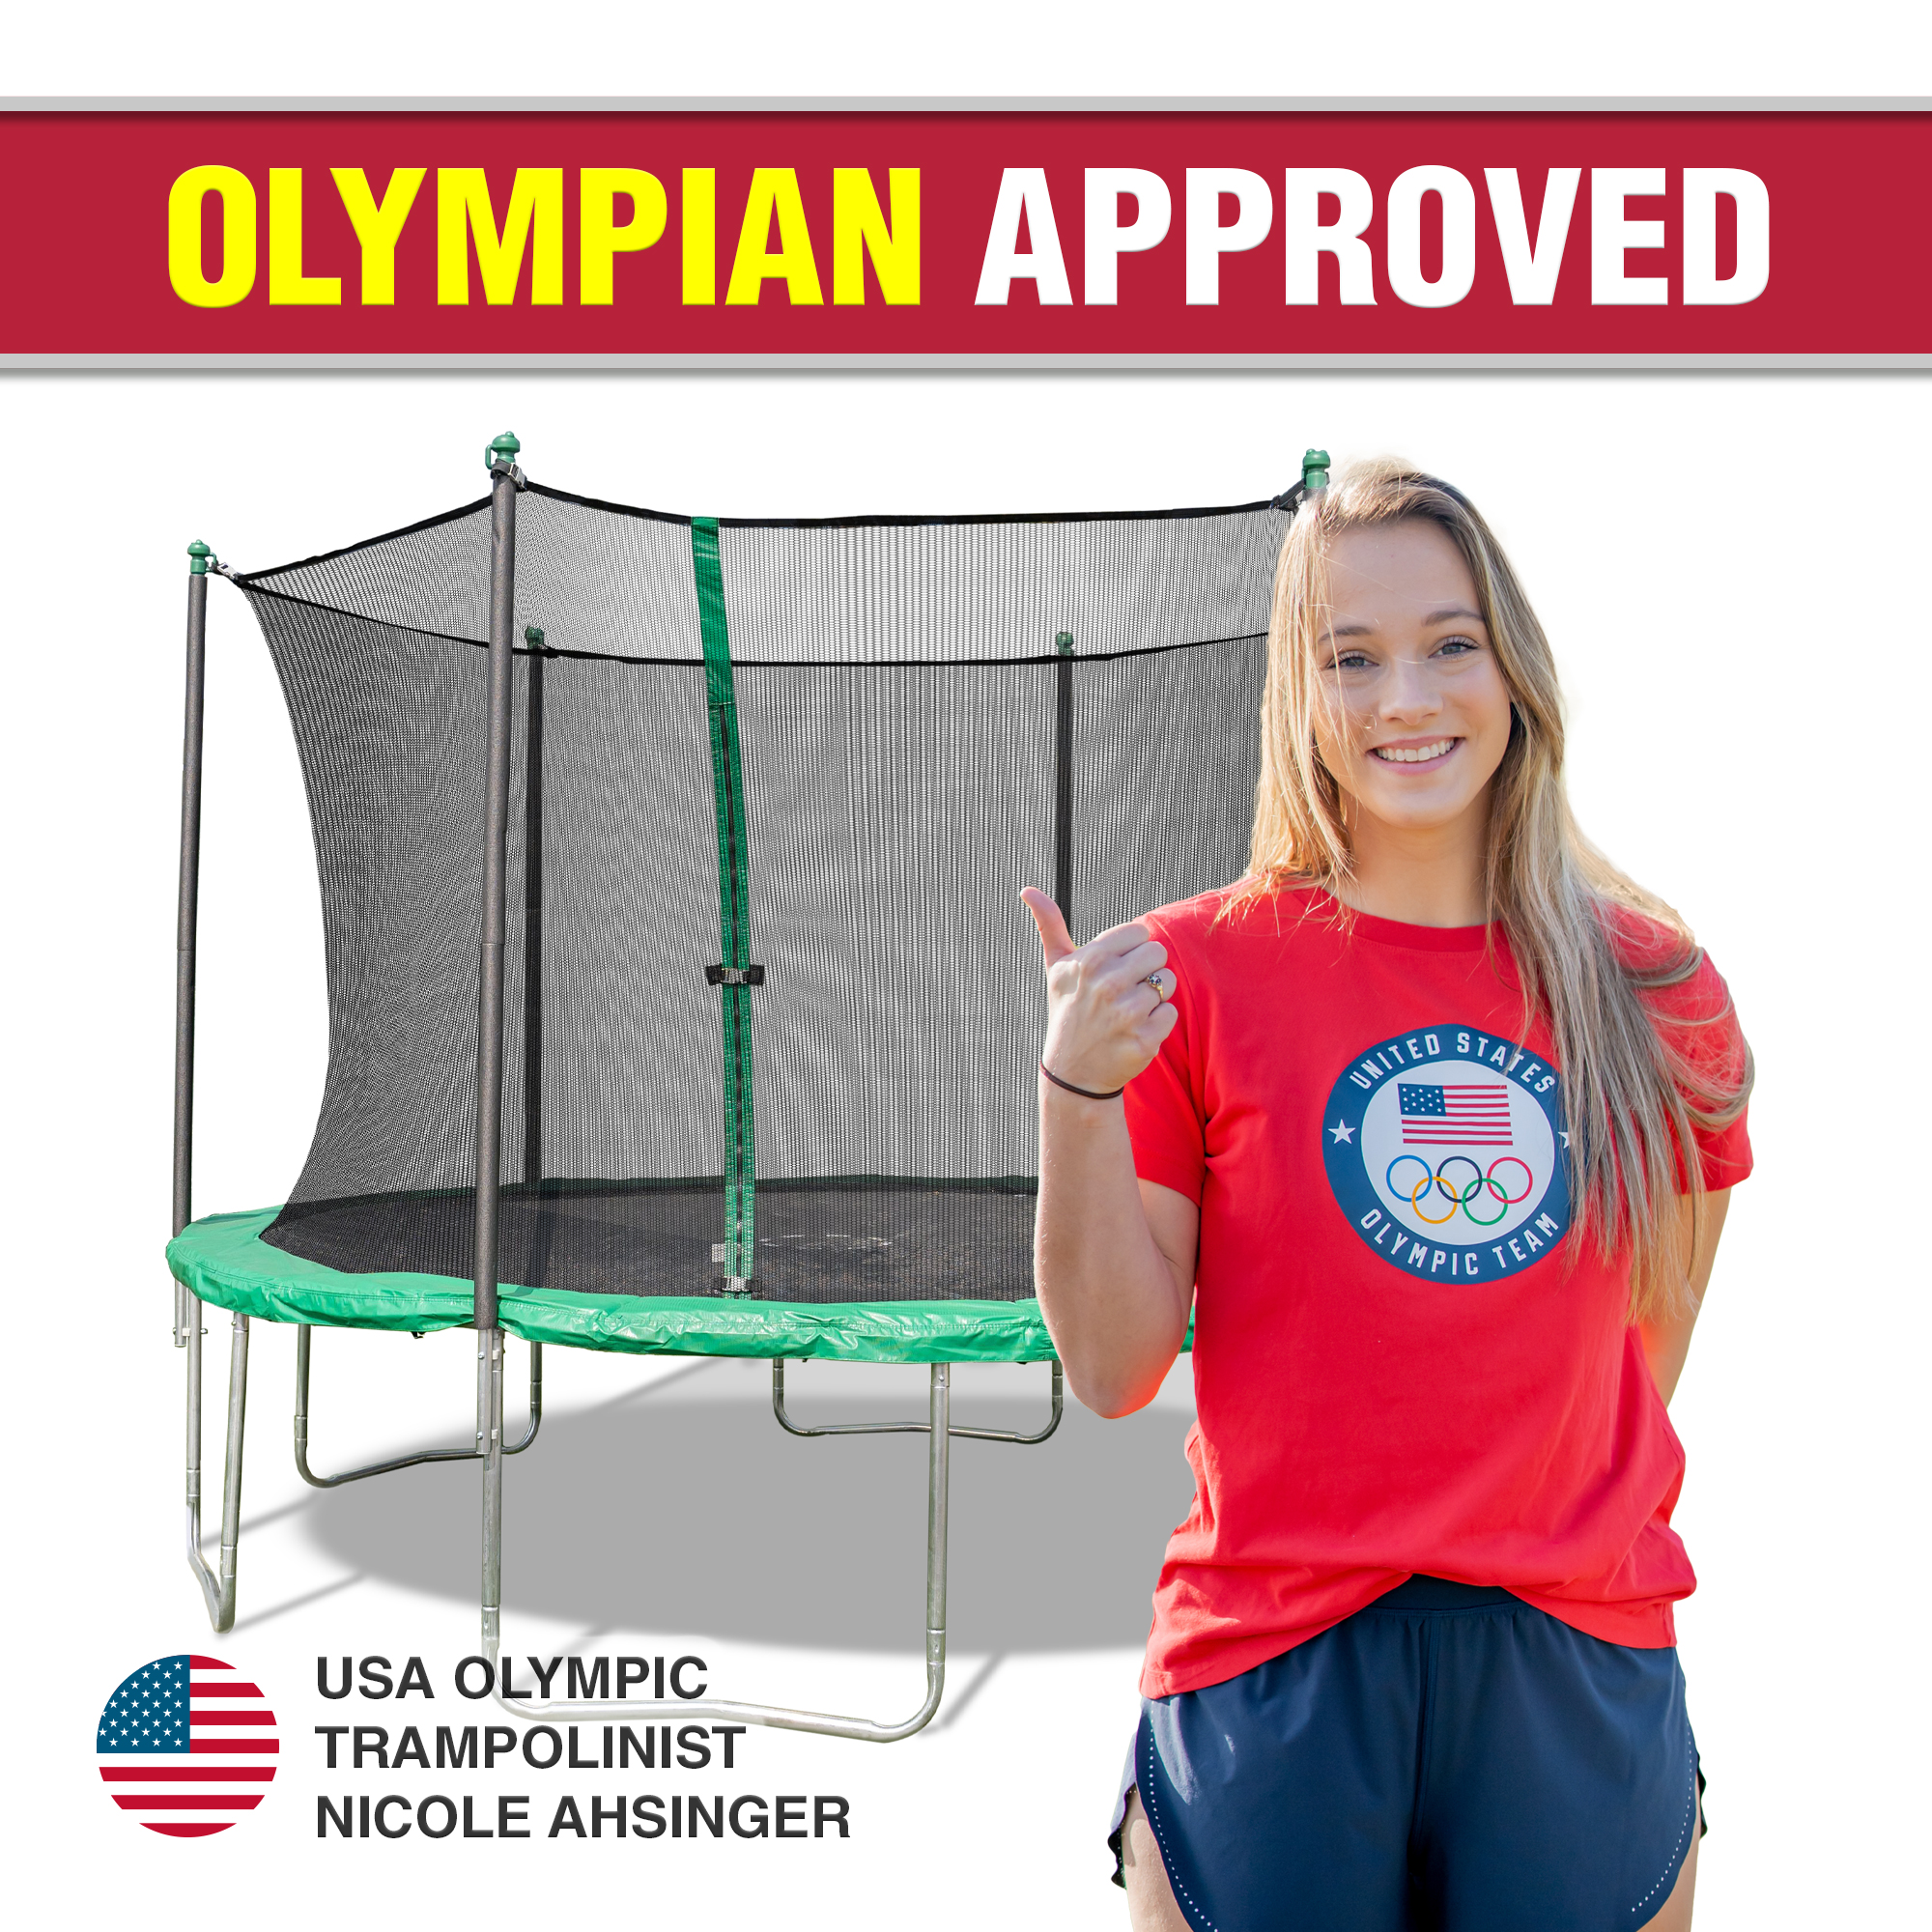 TruJump 12' Trampoline with Safety Enclosure & Jump Mat with Lifetime Warranty (Green) - image 8 of 9